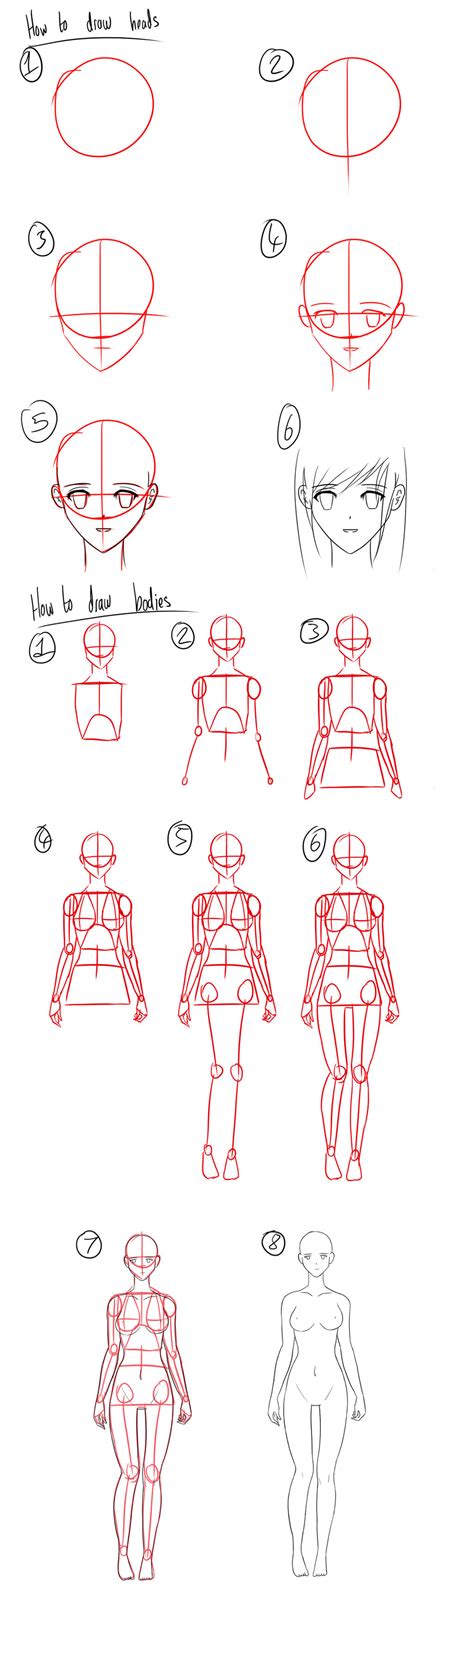 Tutorial How To Draw Anime Headsfemale Bodies By Micky